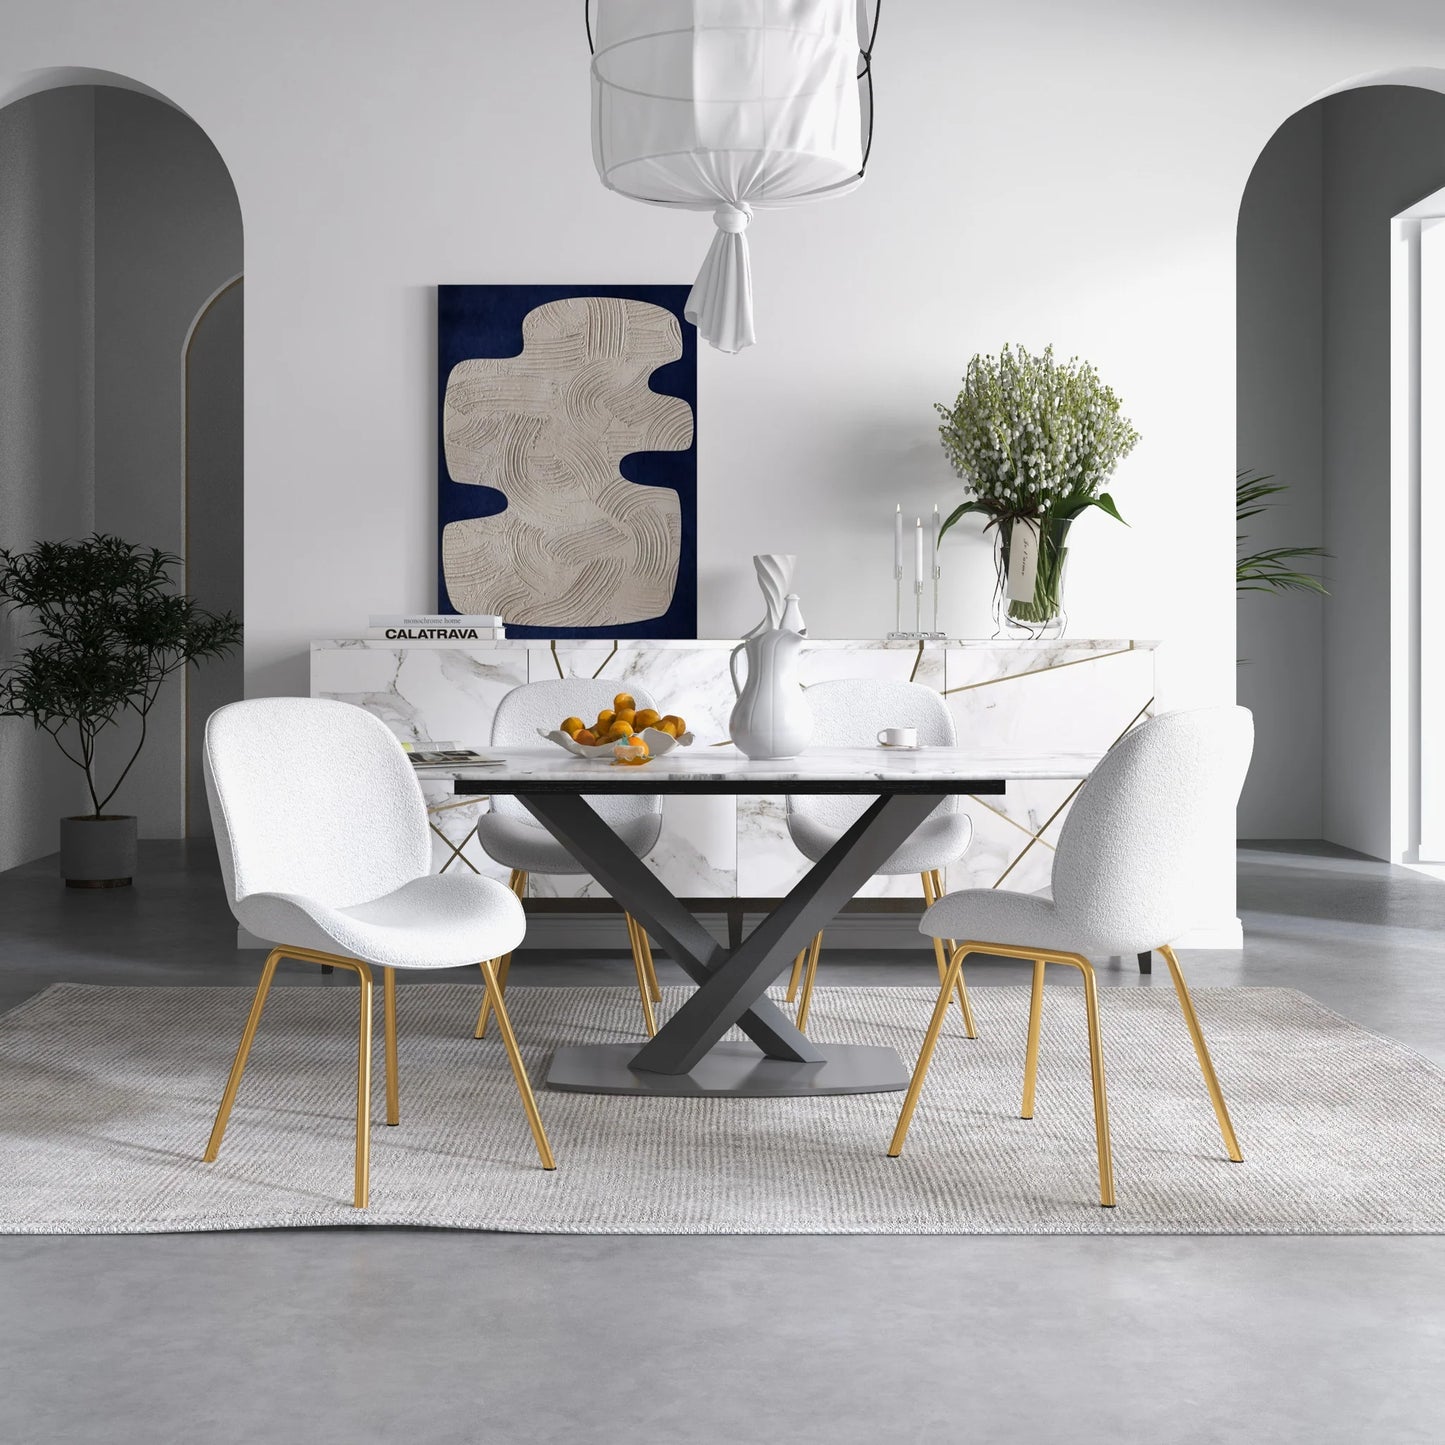 Lucy Beige Boucle Dining Chair